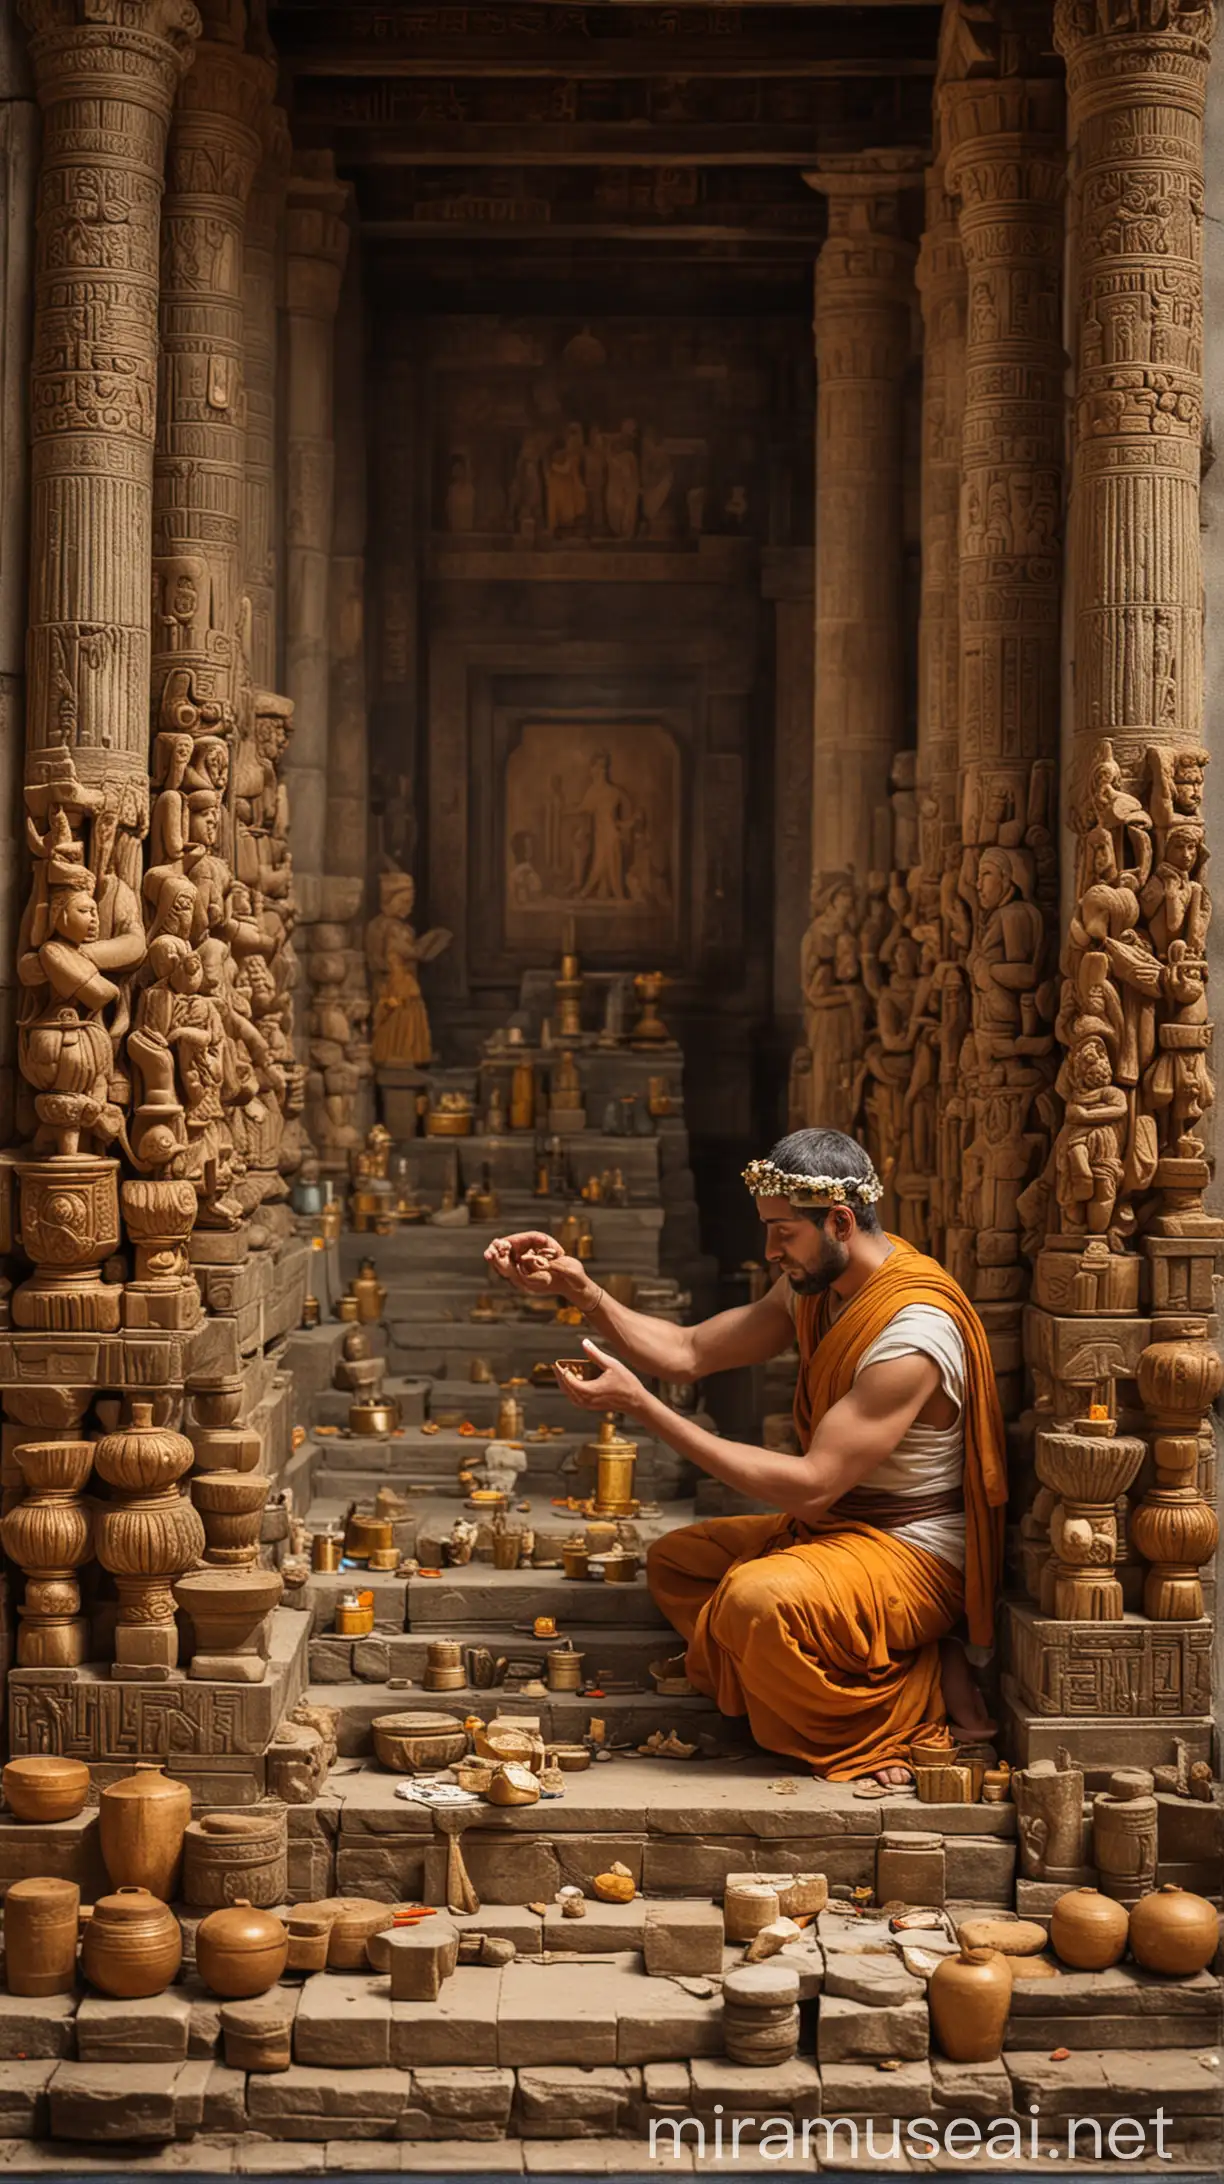 Devout Man Arranging Gifts and Offerings in Ancient Temple